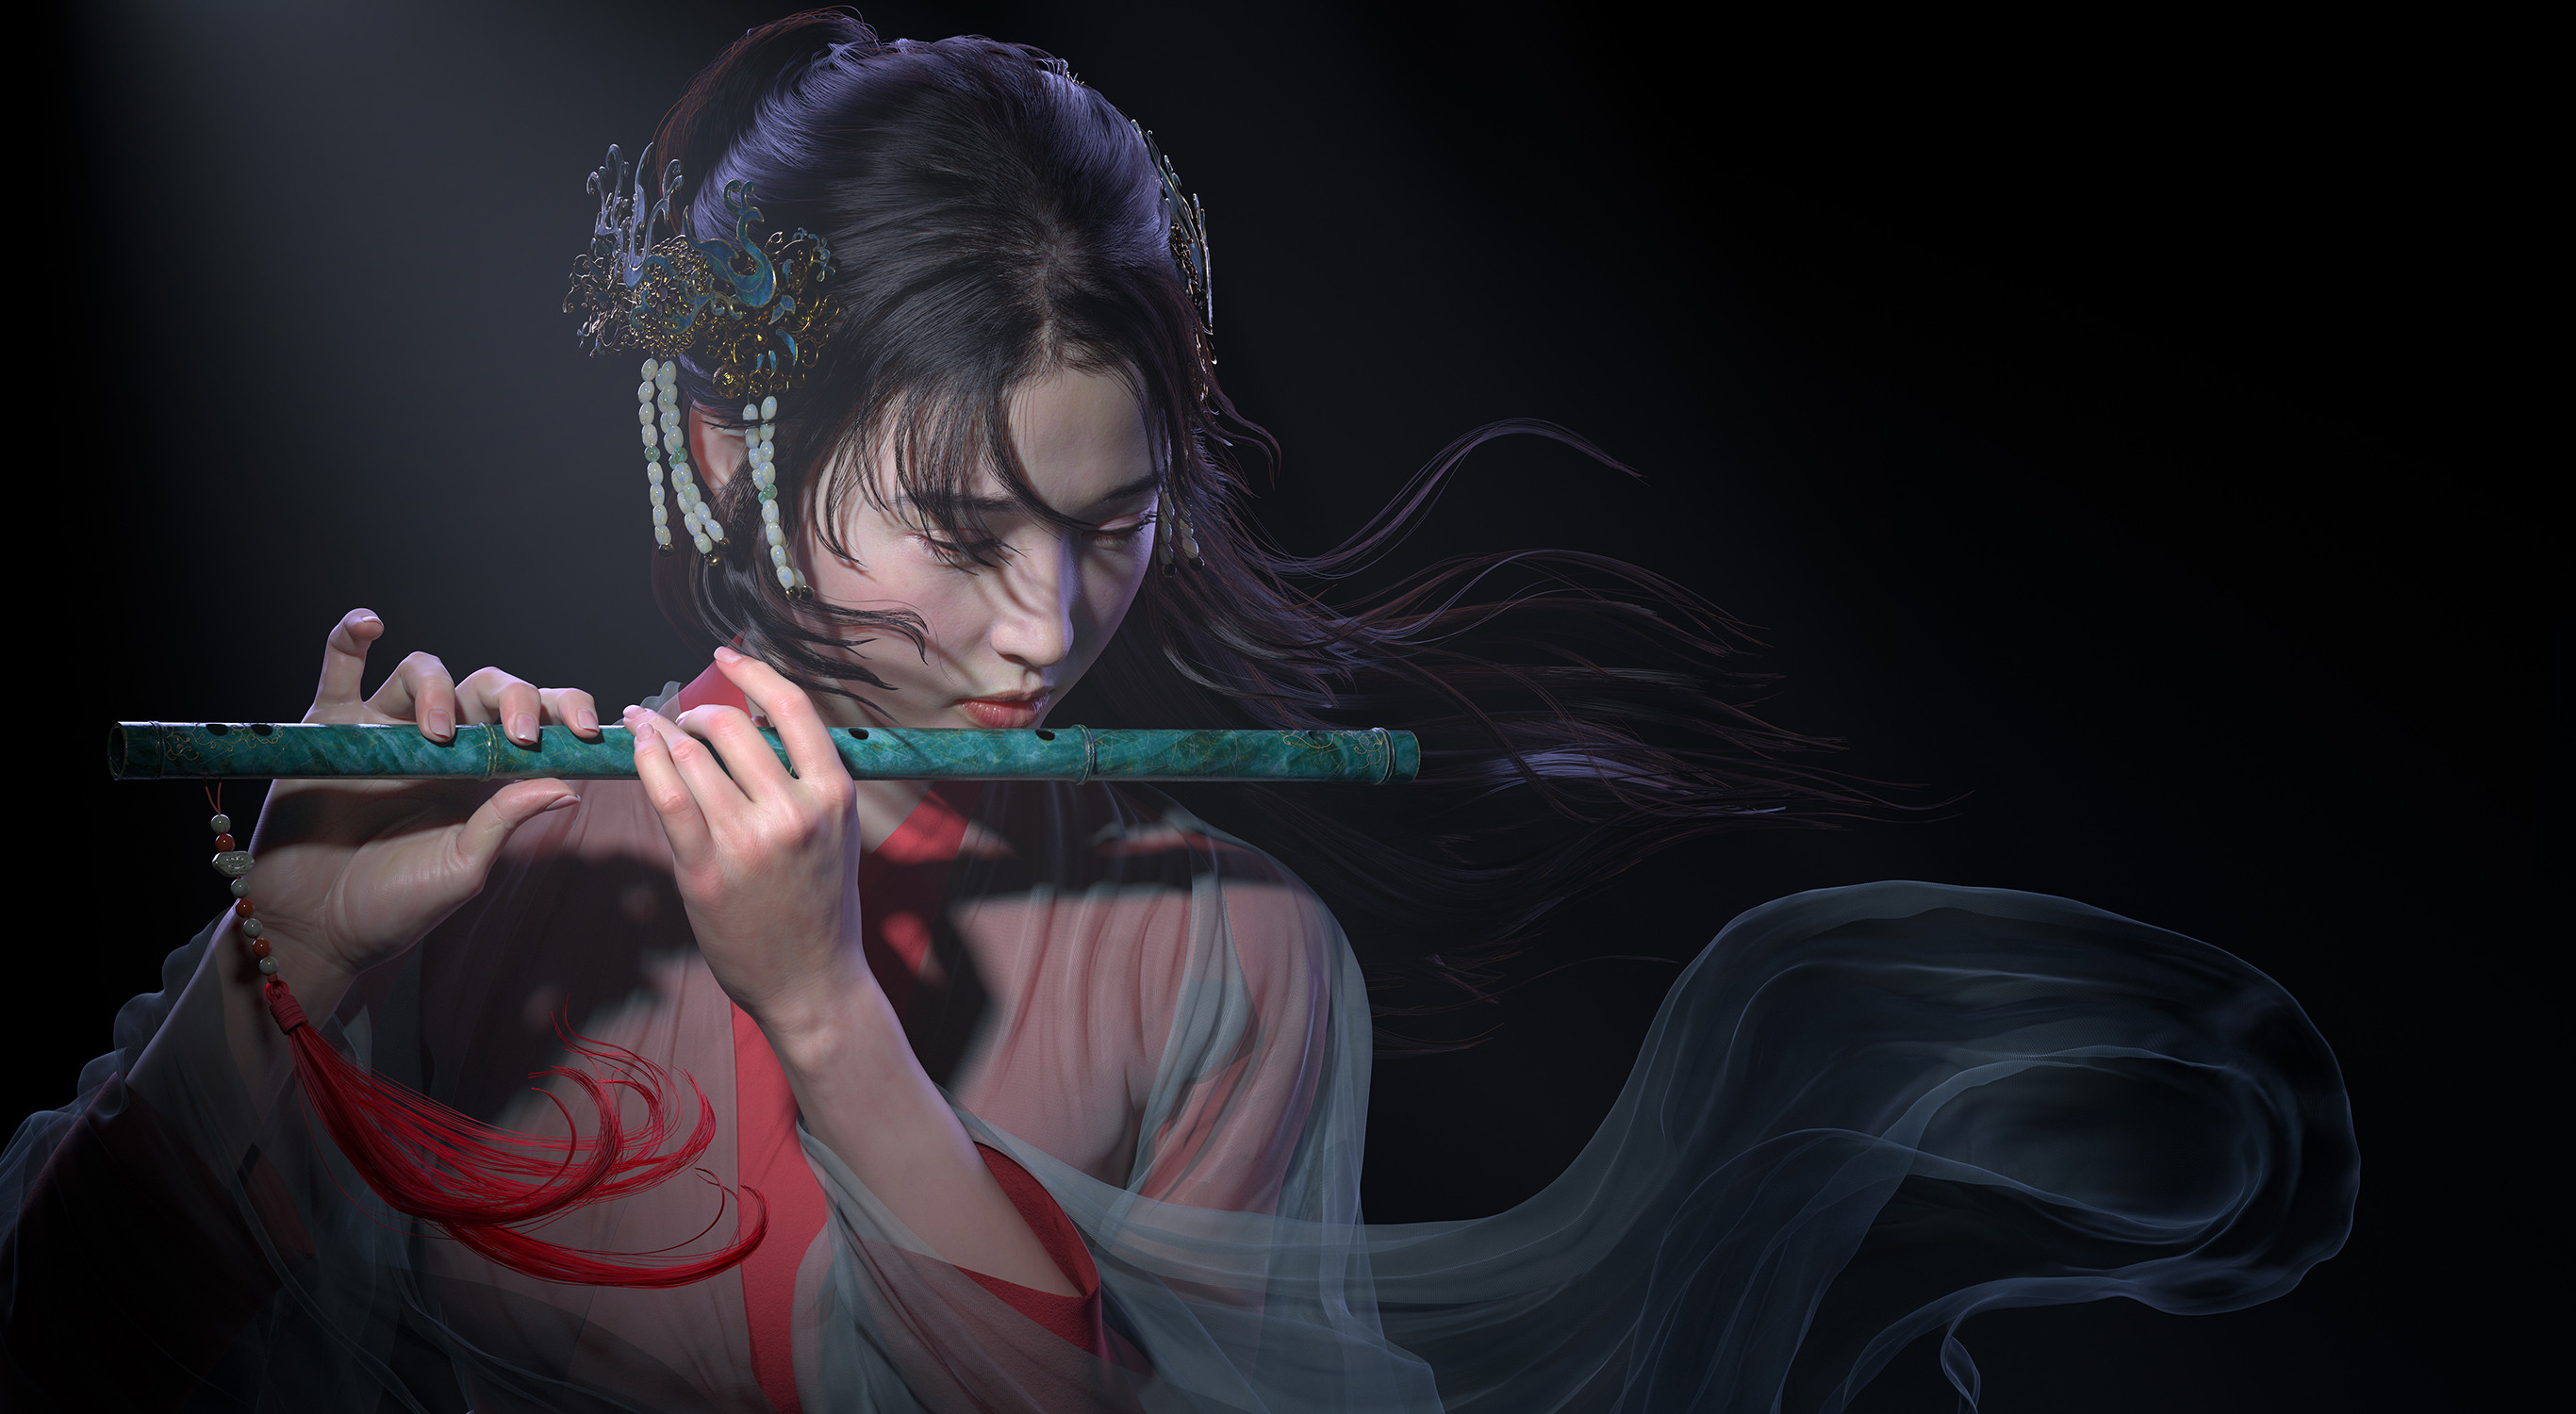 Woman Playing the Flute by Qi Sheng Luo